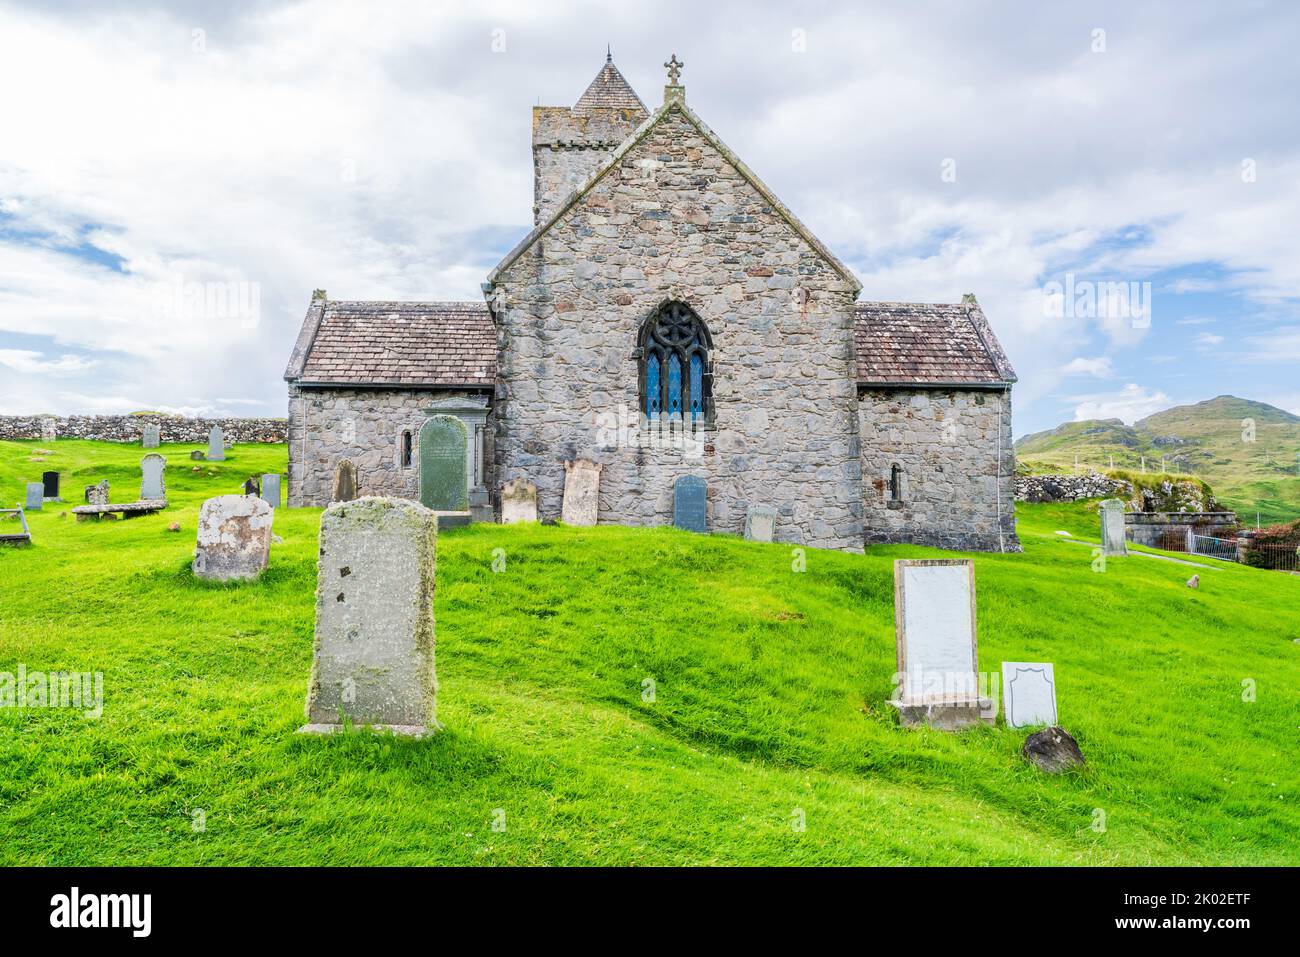 St Clement's Church (also known as Eaglais Roghadail or Rodal Church) in Rodel, Isle of Harris, Scotland Stock Photo